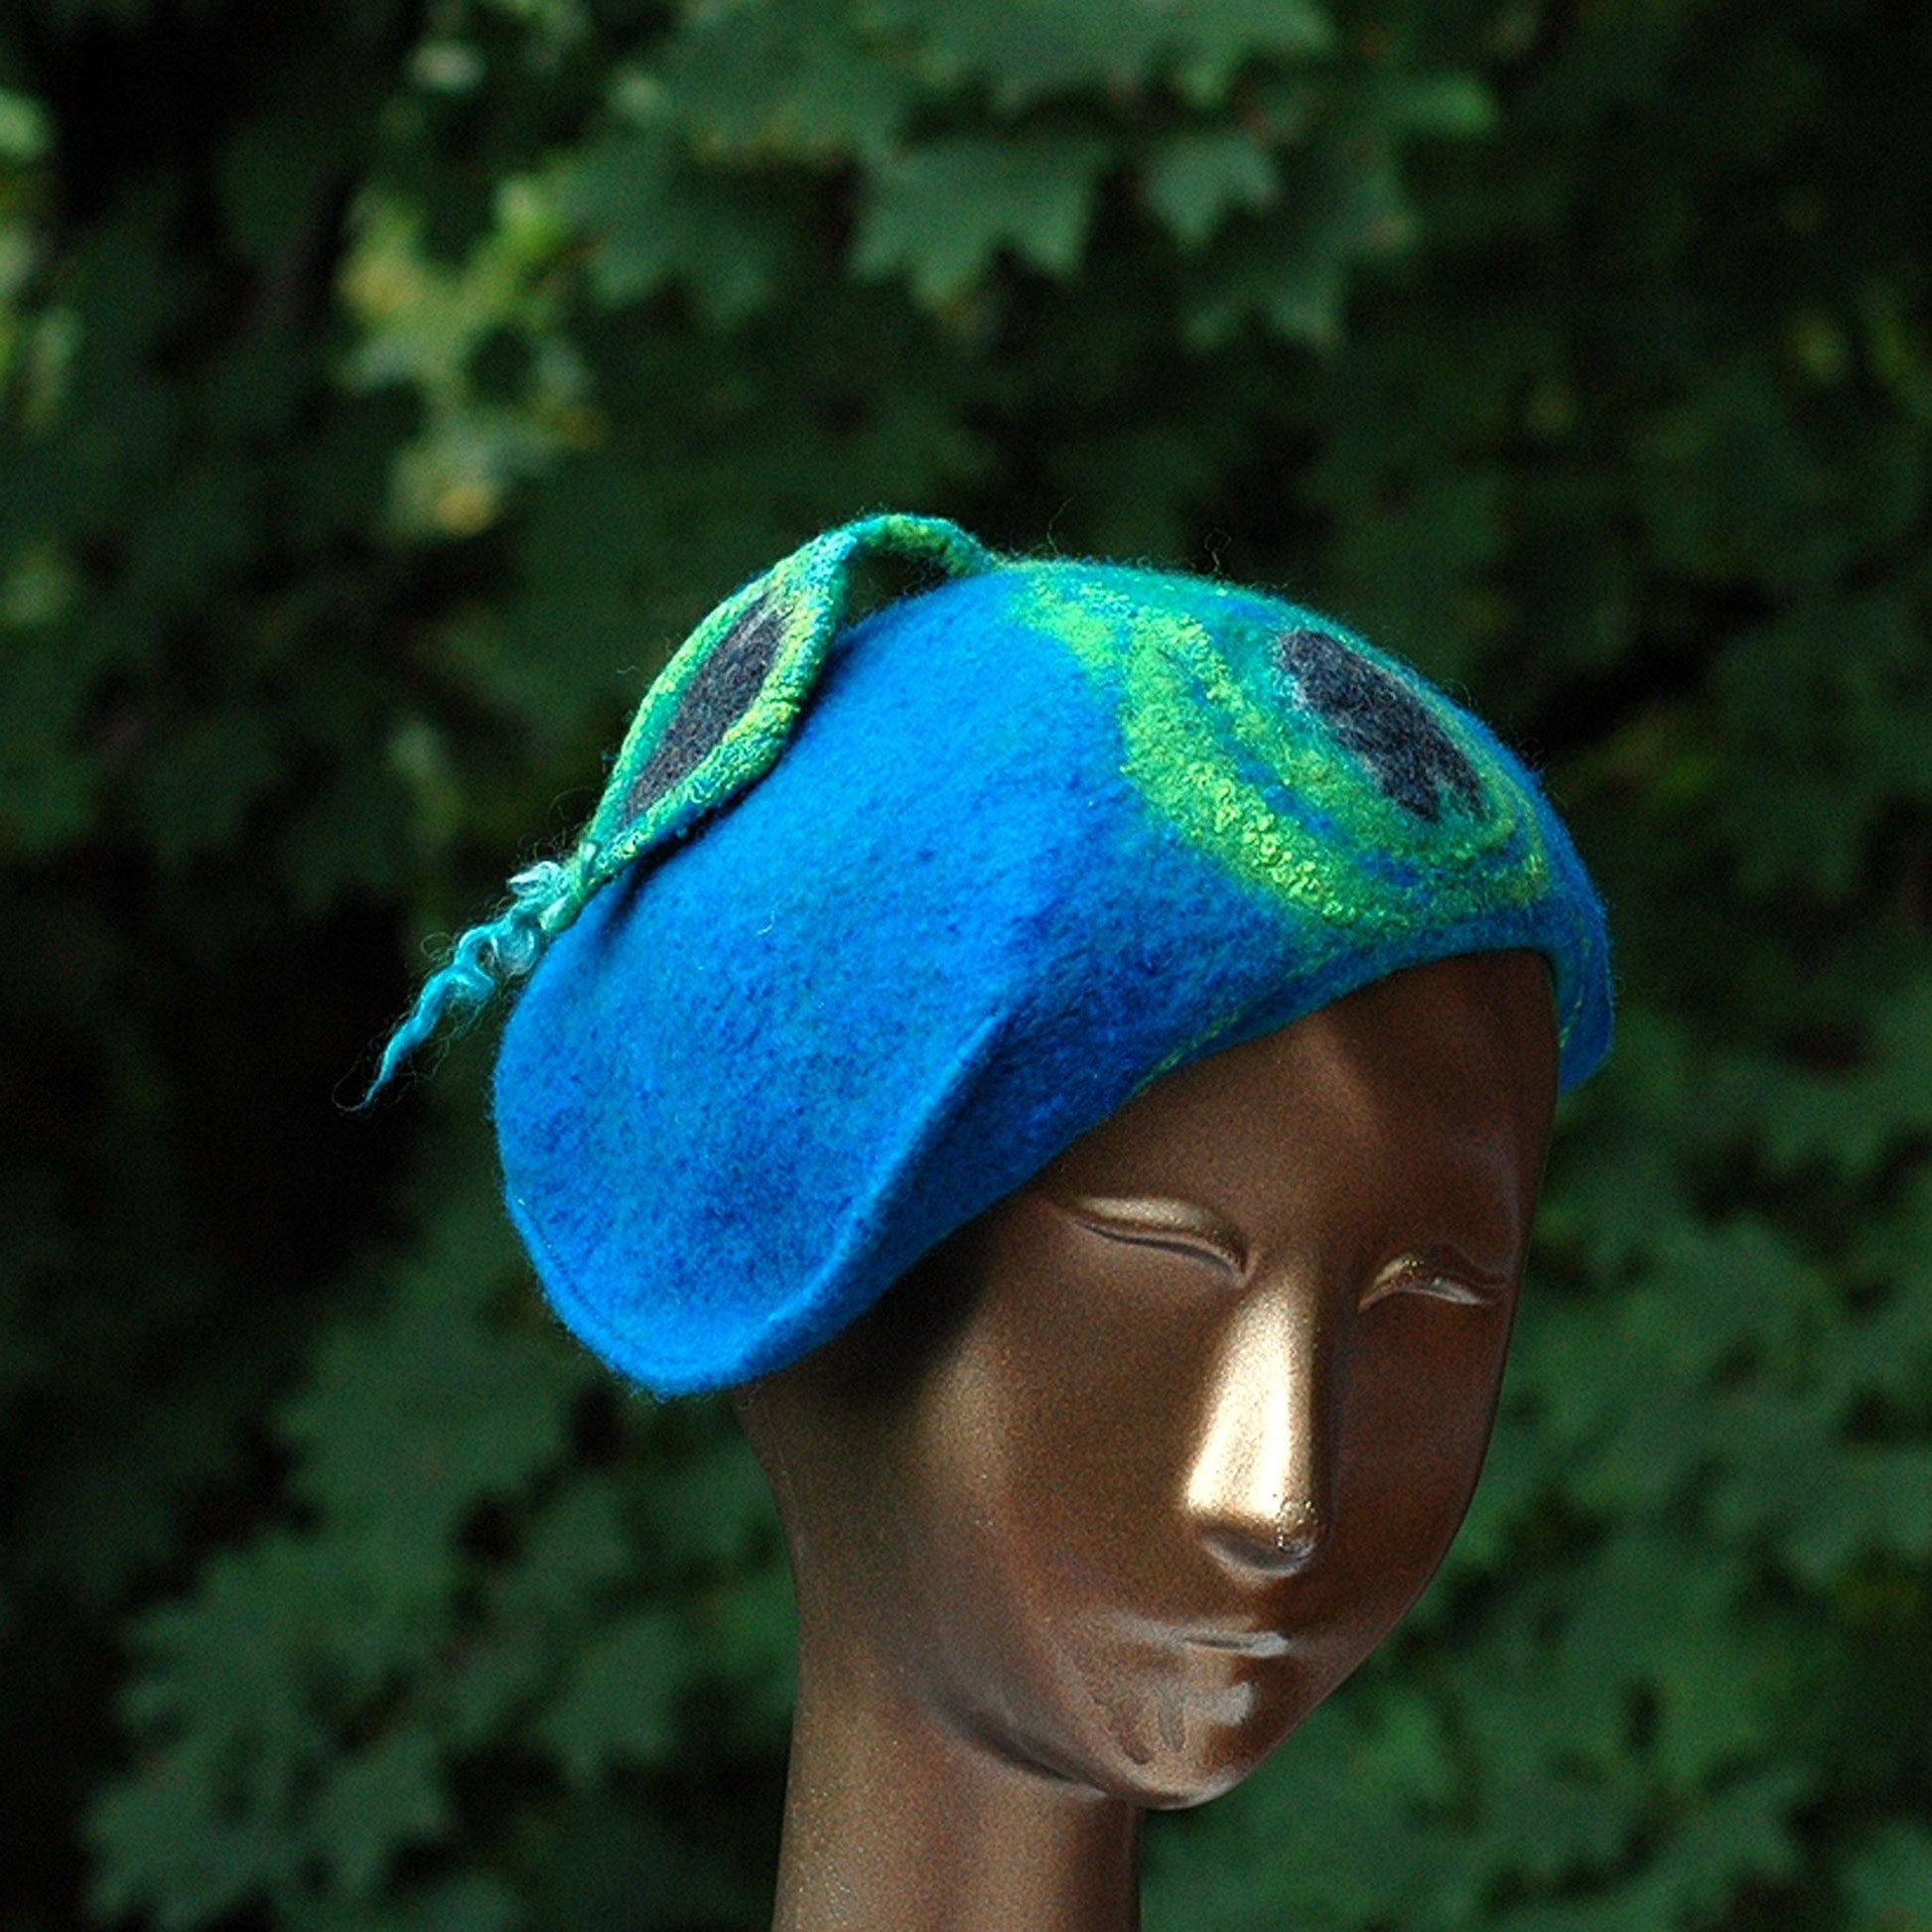 Teal Felted Cap with Stylized Peacock Feathers - front view